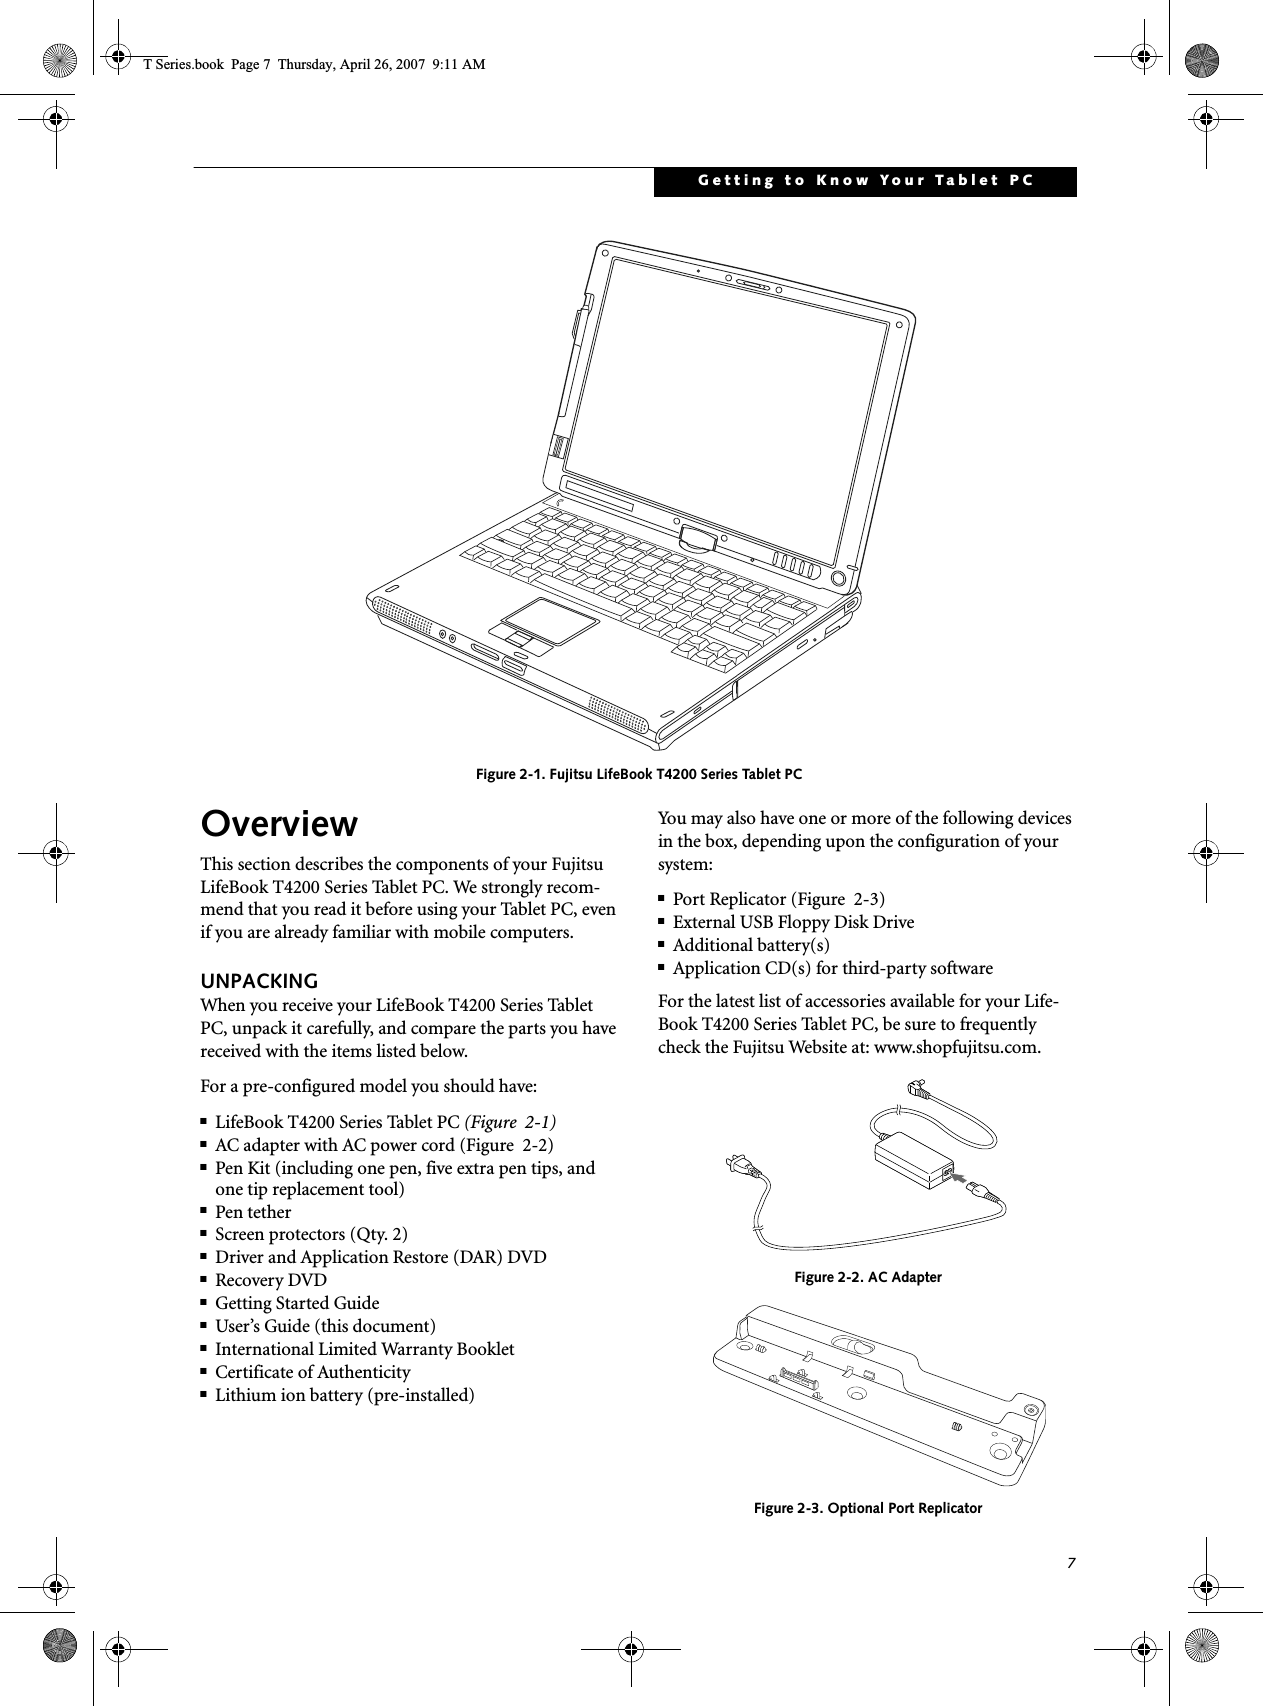 7Getting to Know Your Tablet PC Figure 2-1. Fujitsu LifeBook T4200 Series Tablet PC OverviewThis section describes the components of your Fujitsu LifeBook T4200 Series Tablet PC. We strongly recom-mend that you read it before using your Tablet PC, even if you are already familiar with mobile computers.UNPACKINGWhen you receive your LifeBook T4200 Series Tablet PC, unpack it carefully, and compare the parts you have received with the items listed below.For a pre-configured model you should have:■LifeBook T4200 Series Tablet PC (Figure  2-1)■AC adapter with AC power cord (Figure  2-2)■Pen Kit (including one pen, five extra pen tips, and one tip replacement tool)■Pen tether■Screen protectors (Qty. 2)■Driver and Application Restore (DAR) DVD■Recovery DVD■Getting Started Guide■User’s Guide (this document)■International Limited Warranty Booklet■Certificate of Authenticity■Lithium ion battery (pre-installed)You may also have one or more of the following devices in the box, depending upon the configuration of your system:■Port Replicator (Figure  2-3)■External USB Floppy Disk Drive■Additional battery(s)■Application CD(s) for third-party softwareFor the latest list of accessories available for your Life-Book T4200 Series Tablet PC, be sure to frequently check the Fujitsu Website at: www.shopfujitsu.com. Figure 2-2. AC AdapterFigure 2-3. Optional Port ReplicatorT Series.book  Page 7  Thursday, April 26, 2007  9:11 AM